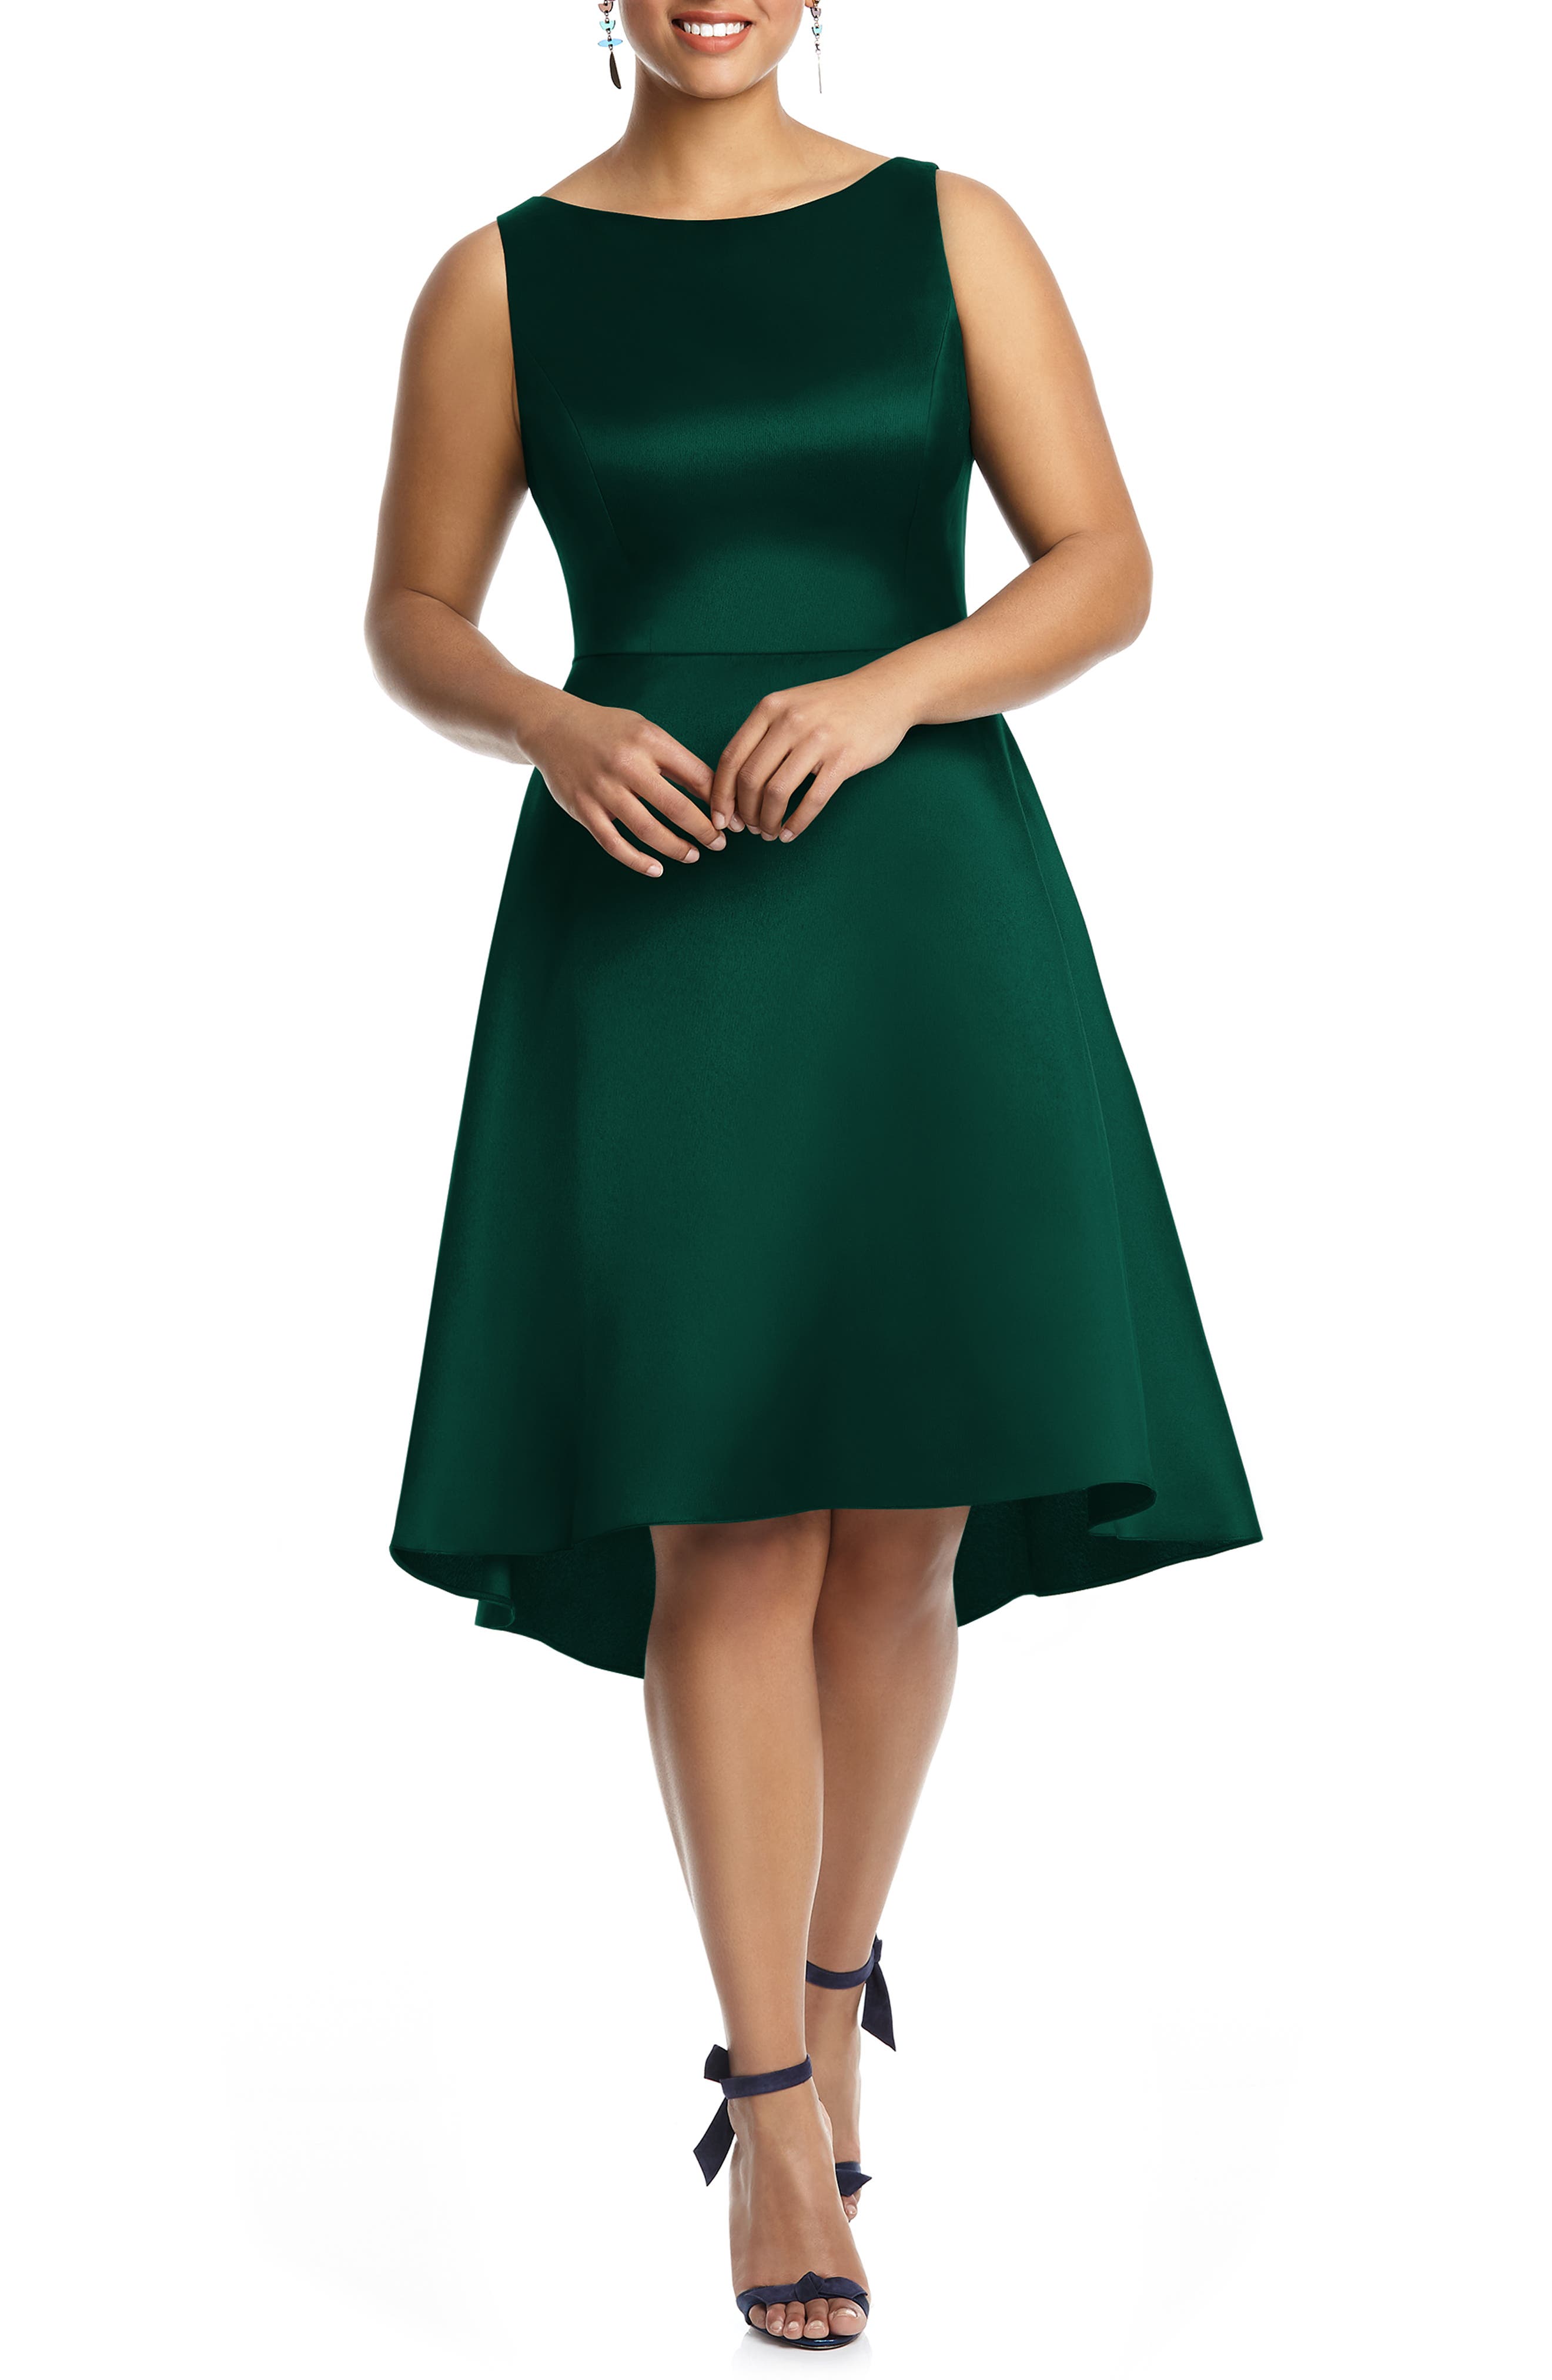 Olive Green Cotton Knee Length Dress A-Line Dress with Pockets Customizable Dress for Women